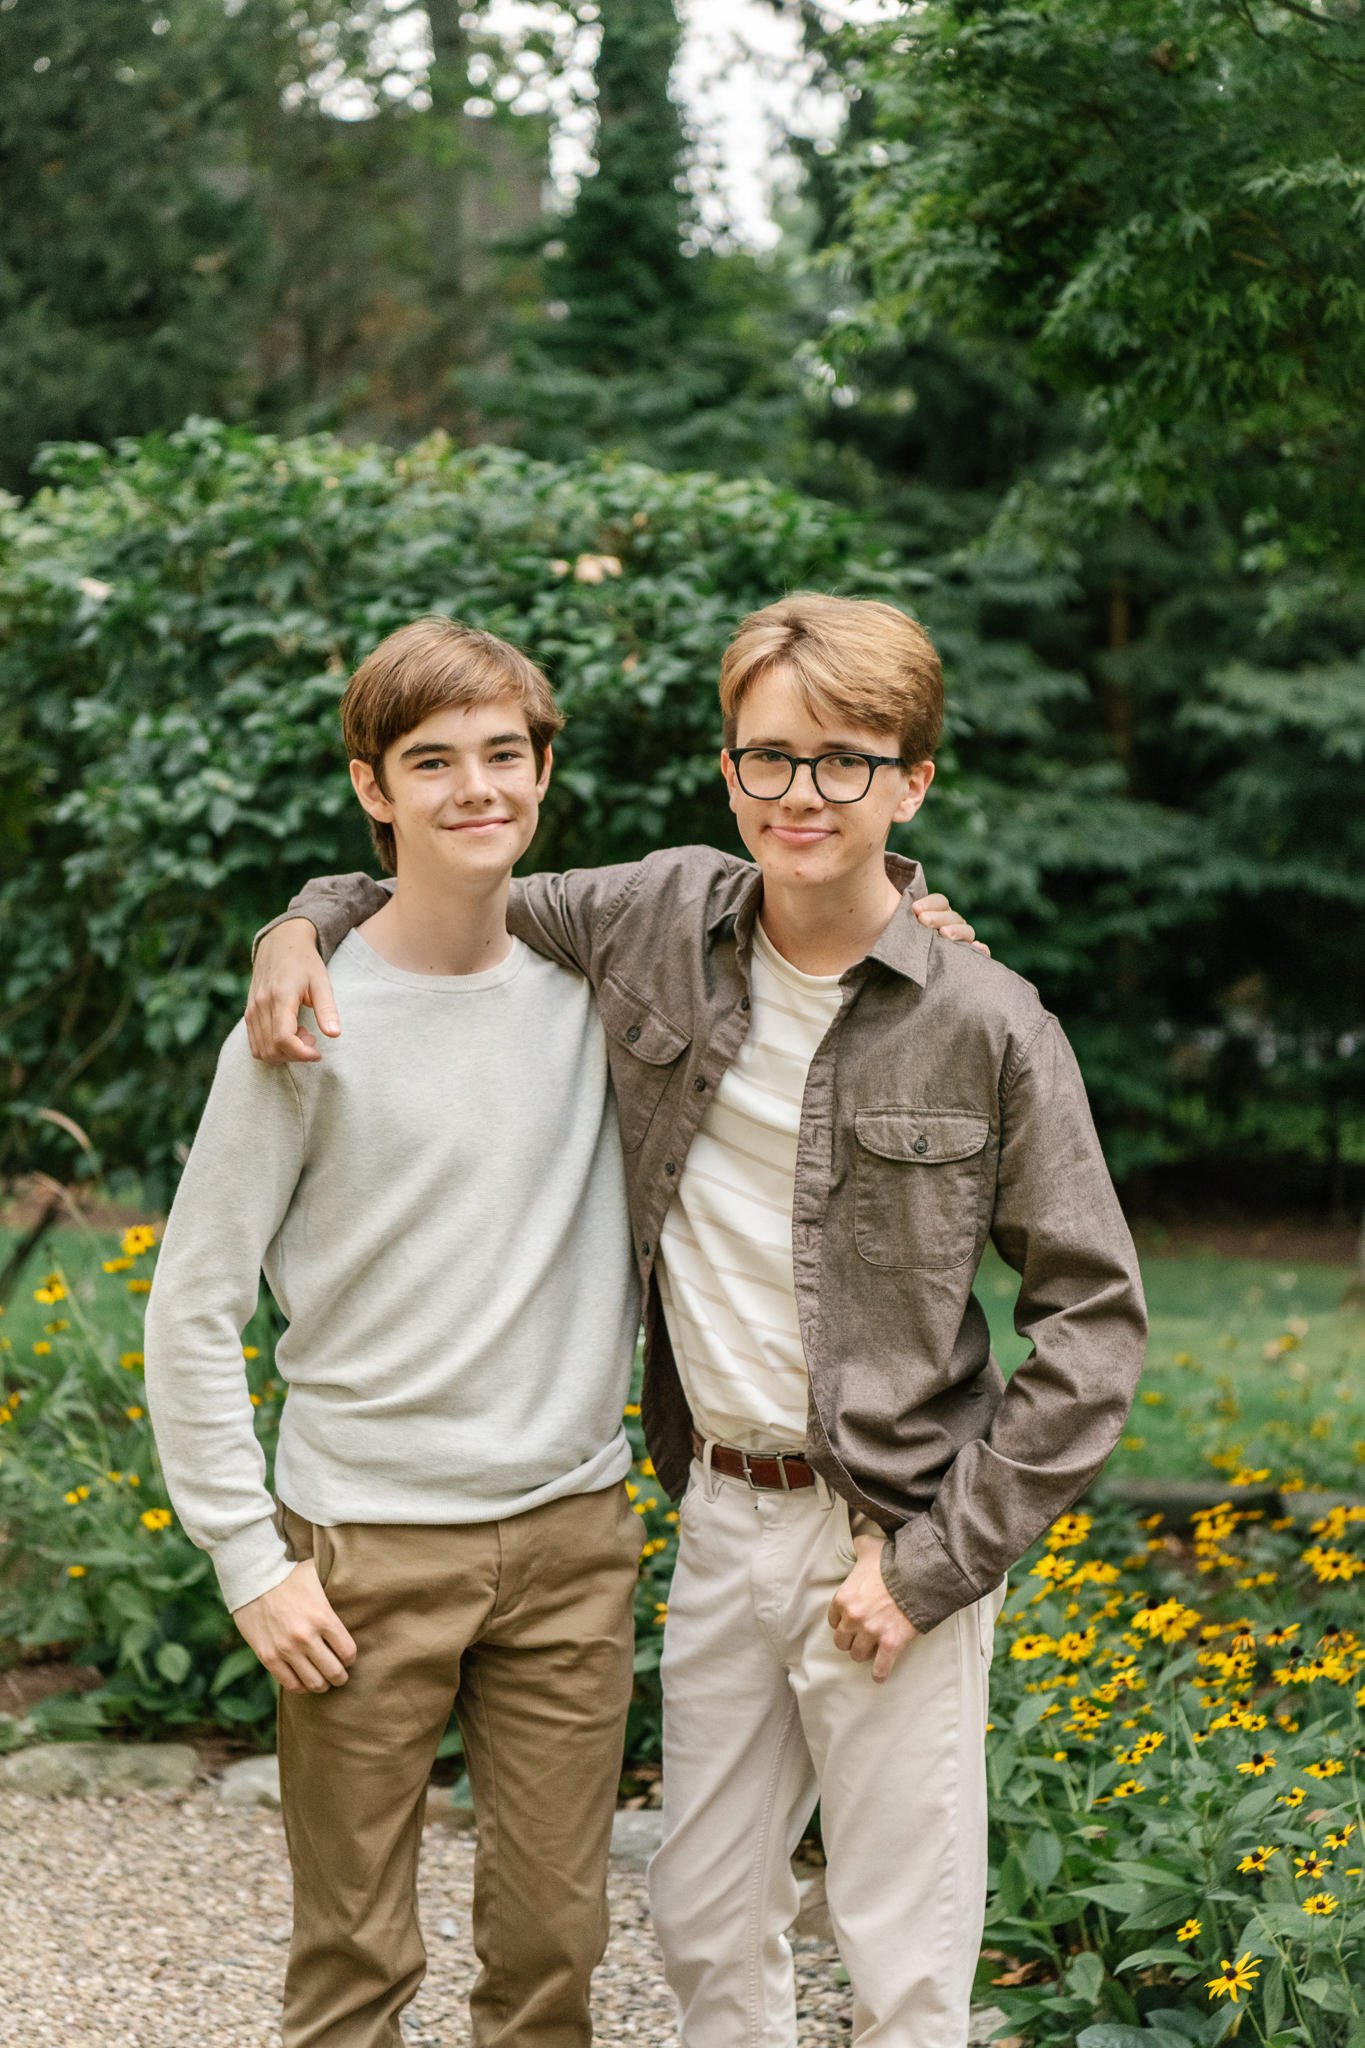  Two brothers with their arms around each other in a green backyard in New Jersey by Nicole Hawkins Photography. brother portrait #NicoleHawkinsPhotography #NicoleHawkinsFamilyPortrait #NicoleHawkinsSenior #NJPortraits #siblingportrait 